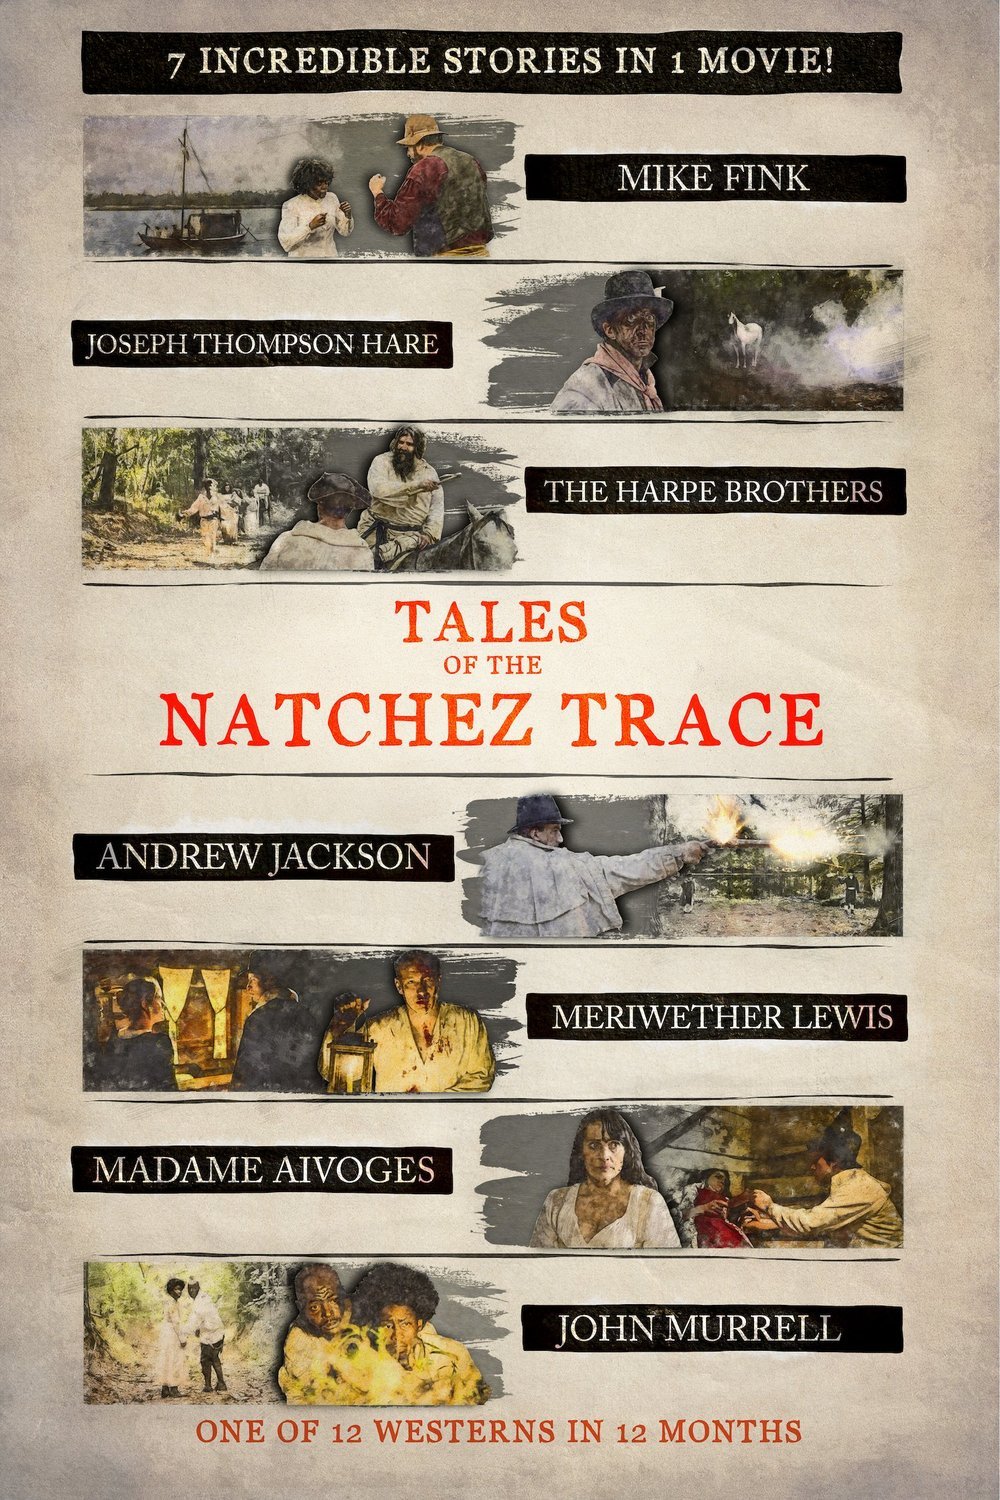 Poster of the movie Tales of the Natchez Trace